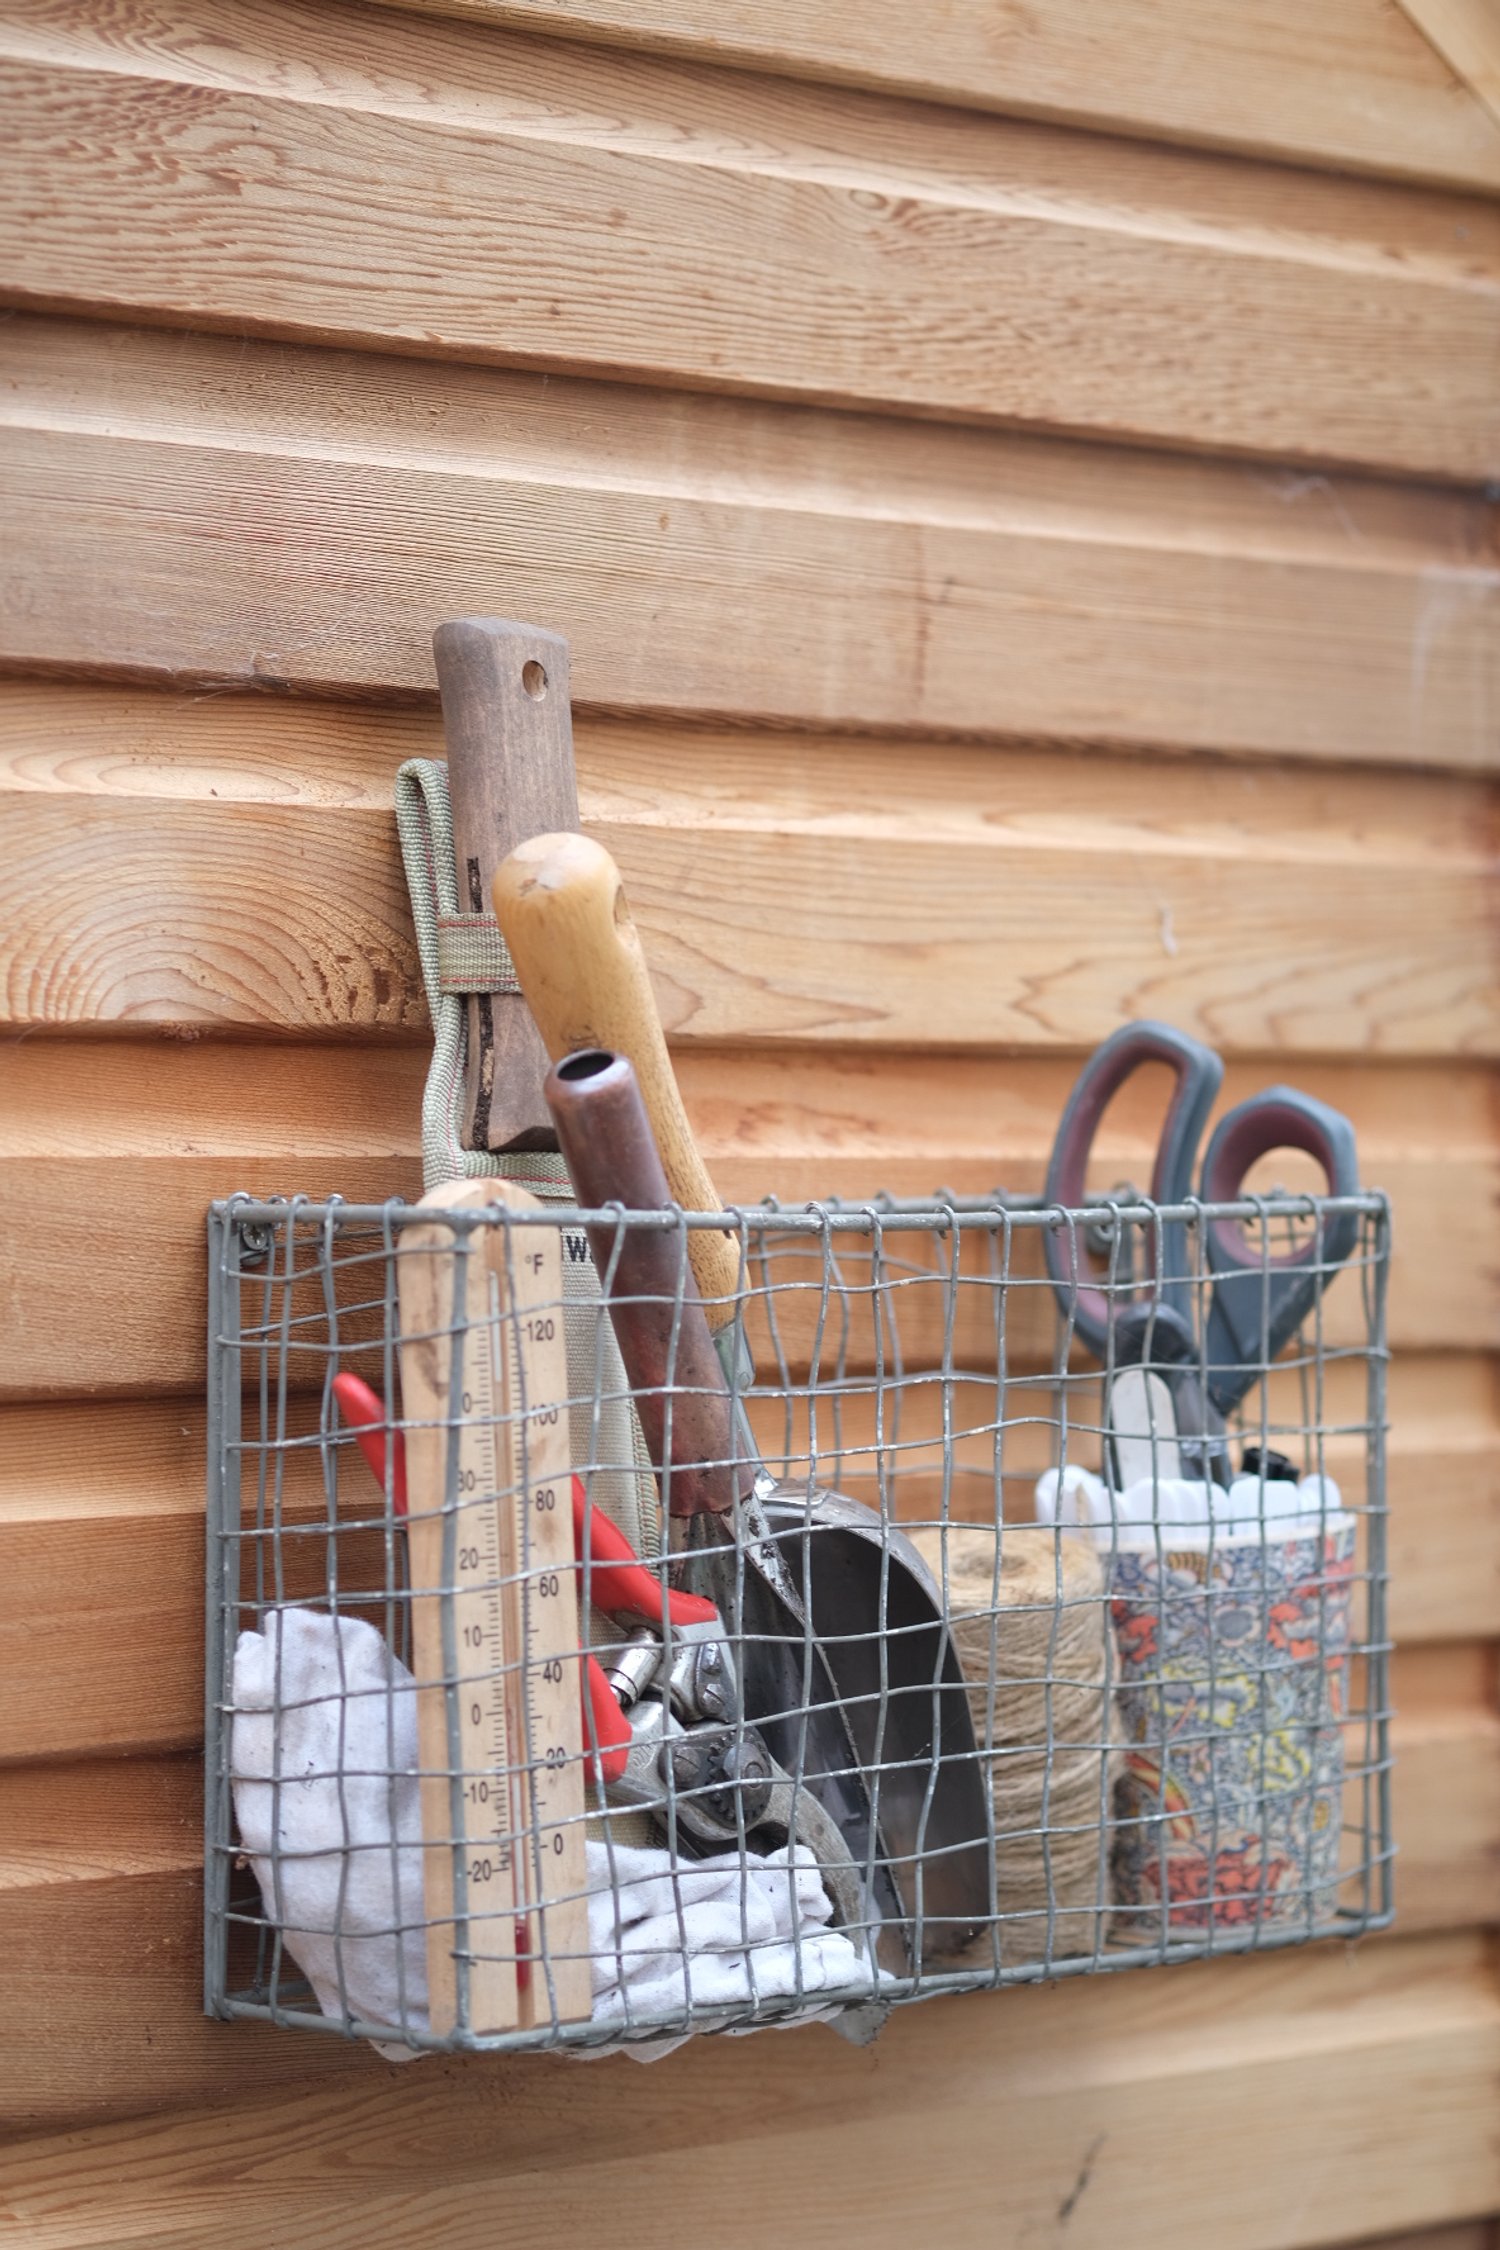 Potting shed and tools